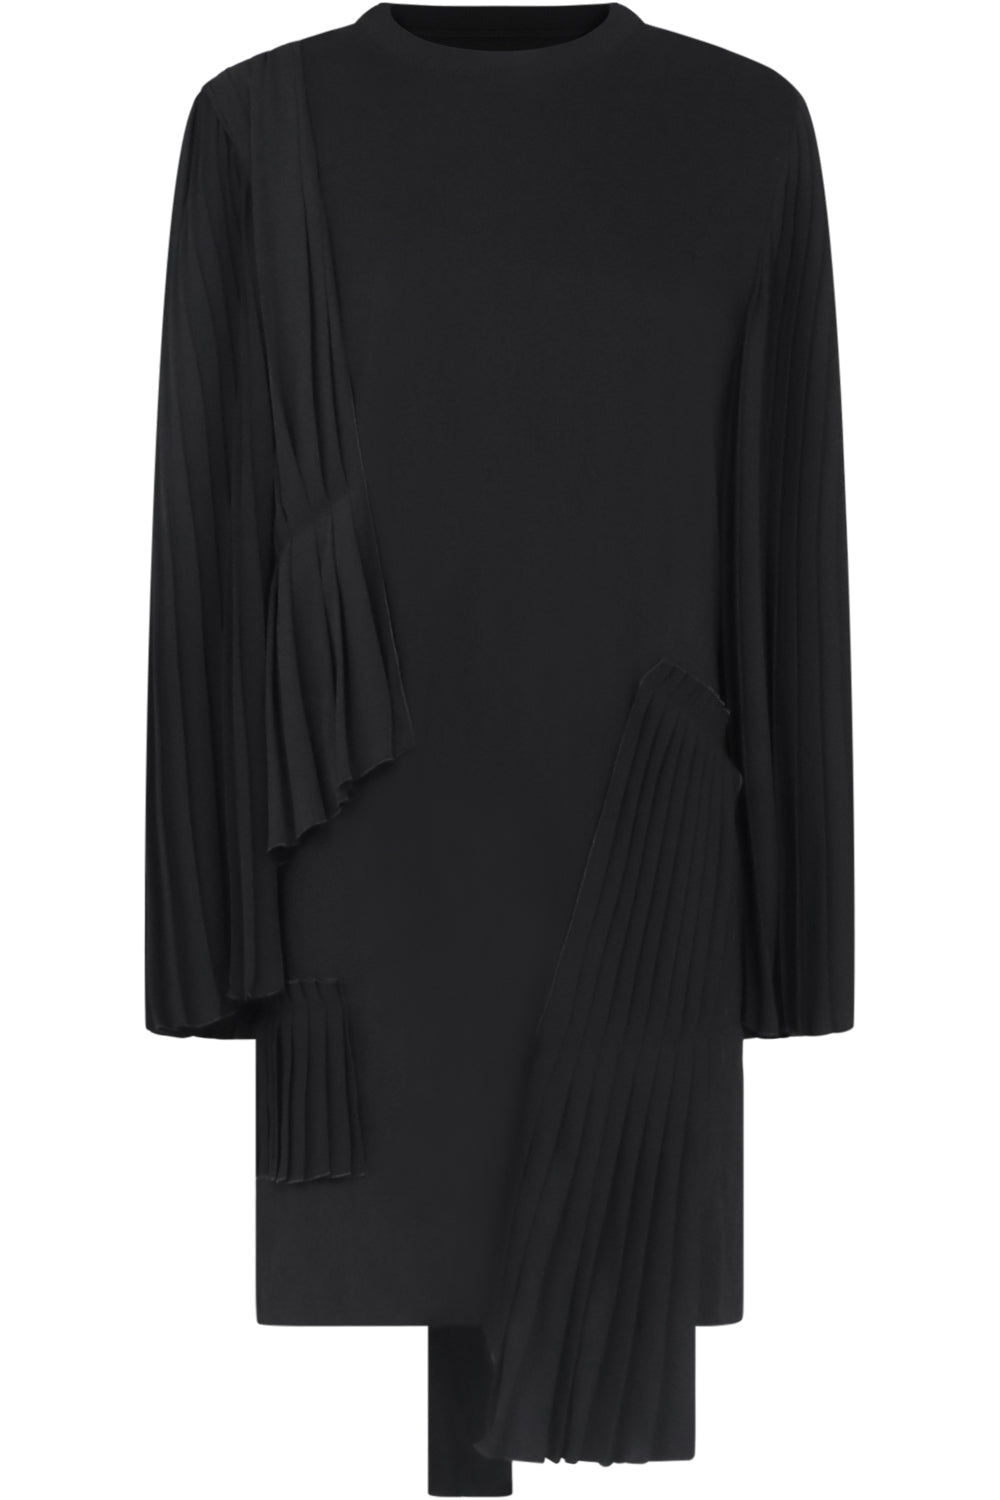 MM6 BY MAISON MARGIELA RTW T-SHIRT DRESS L/S WITH PLEATING DETAIL | BLACK